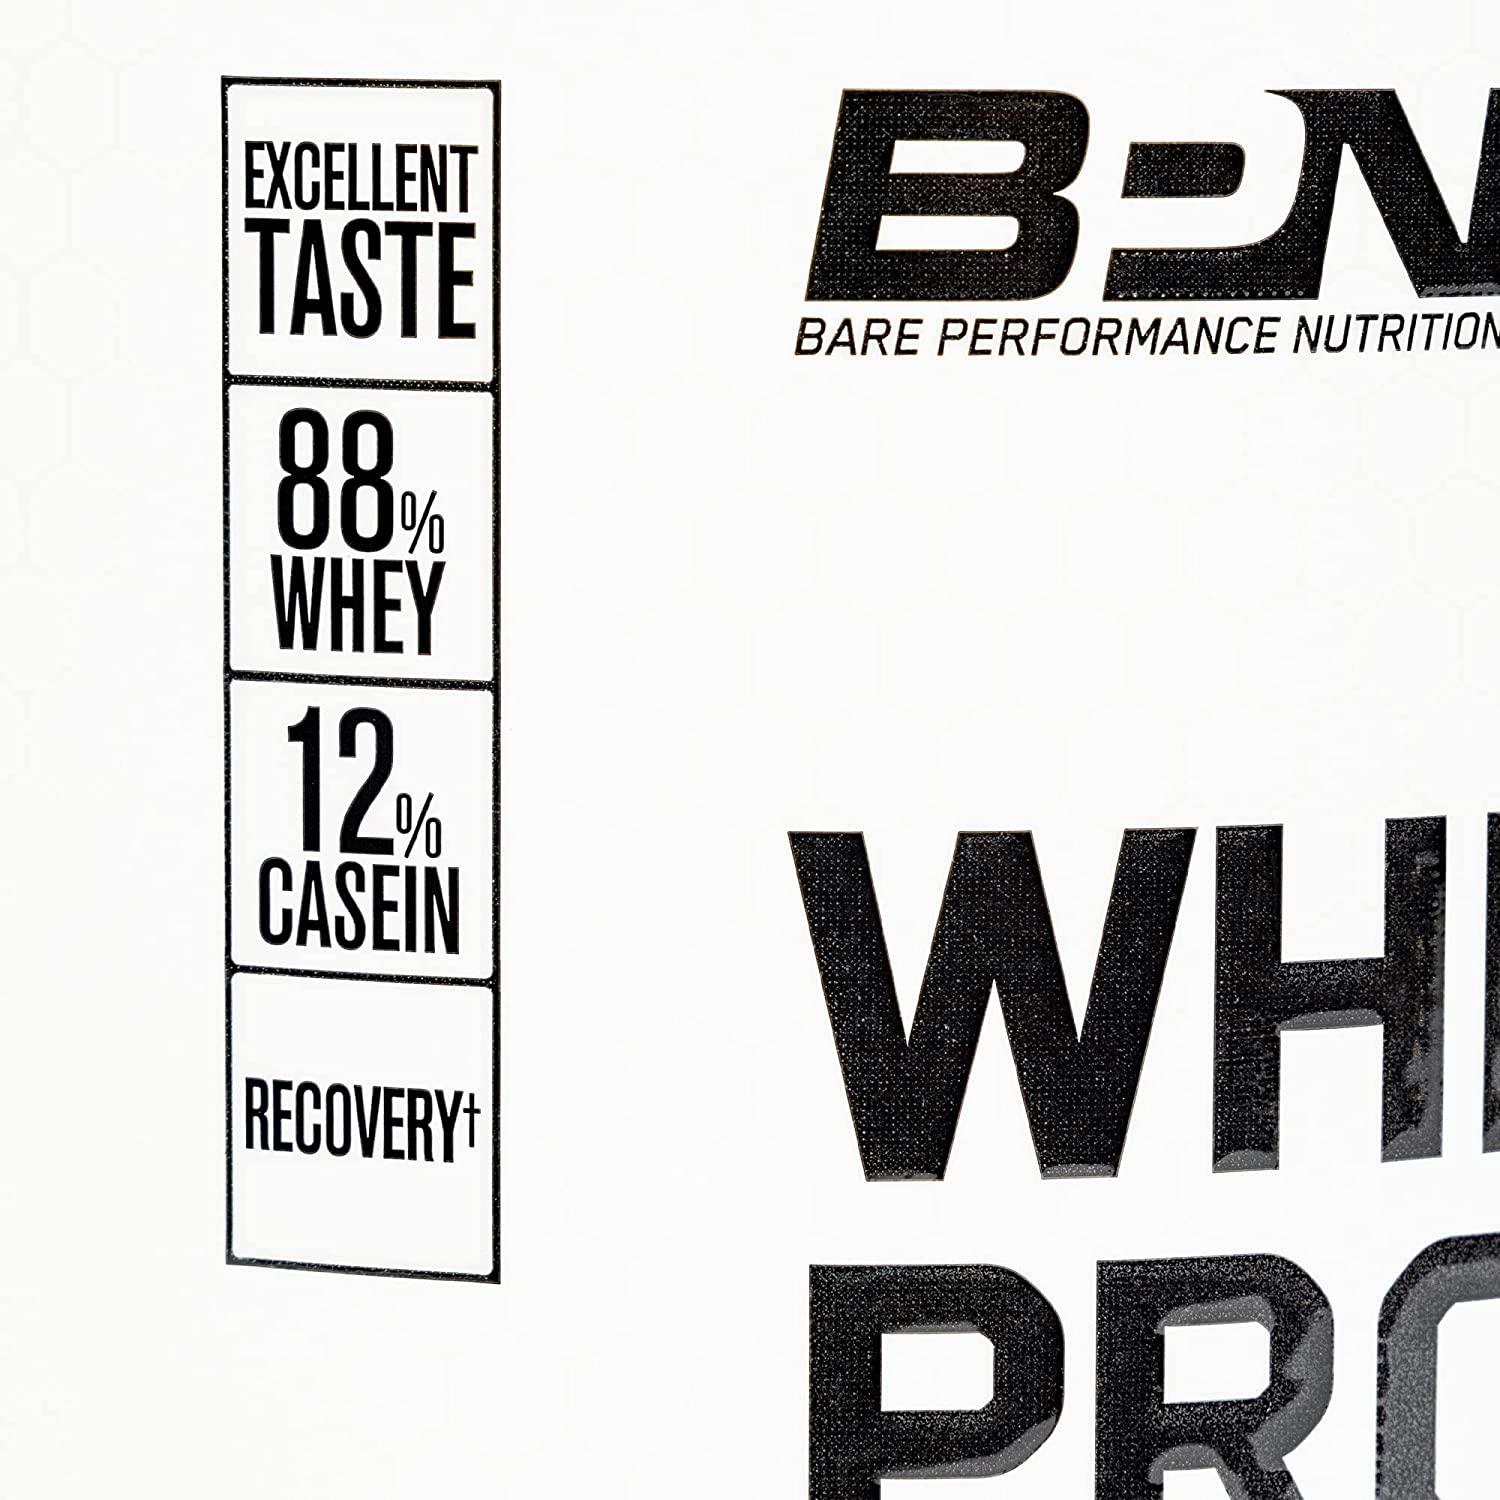 Bare Performance Nutrition, BPN Whey Protein Powder, Milk N' Cookies, 25g  of Protein, Excellent Taste & Low Carbohydrates, 88% Whey Protein & 12%  Casein Protein, 27 Servings 